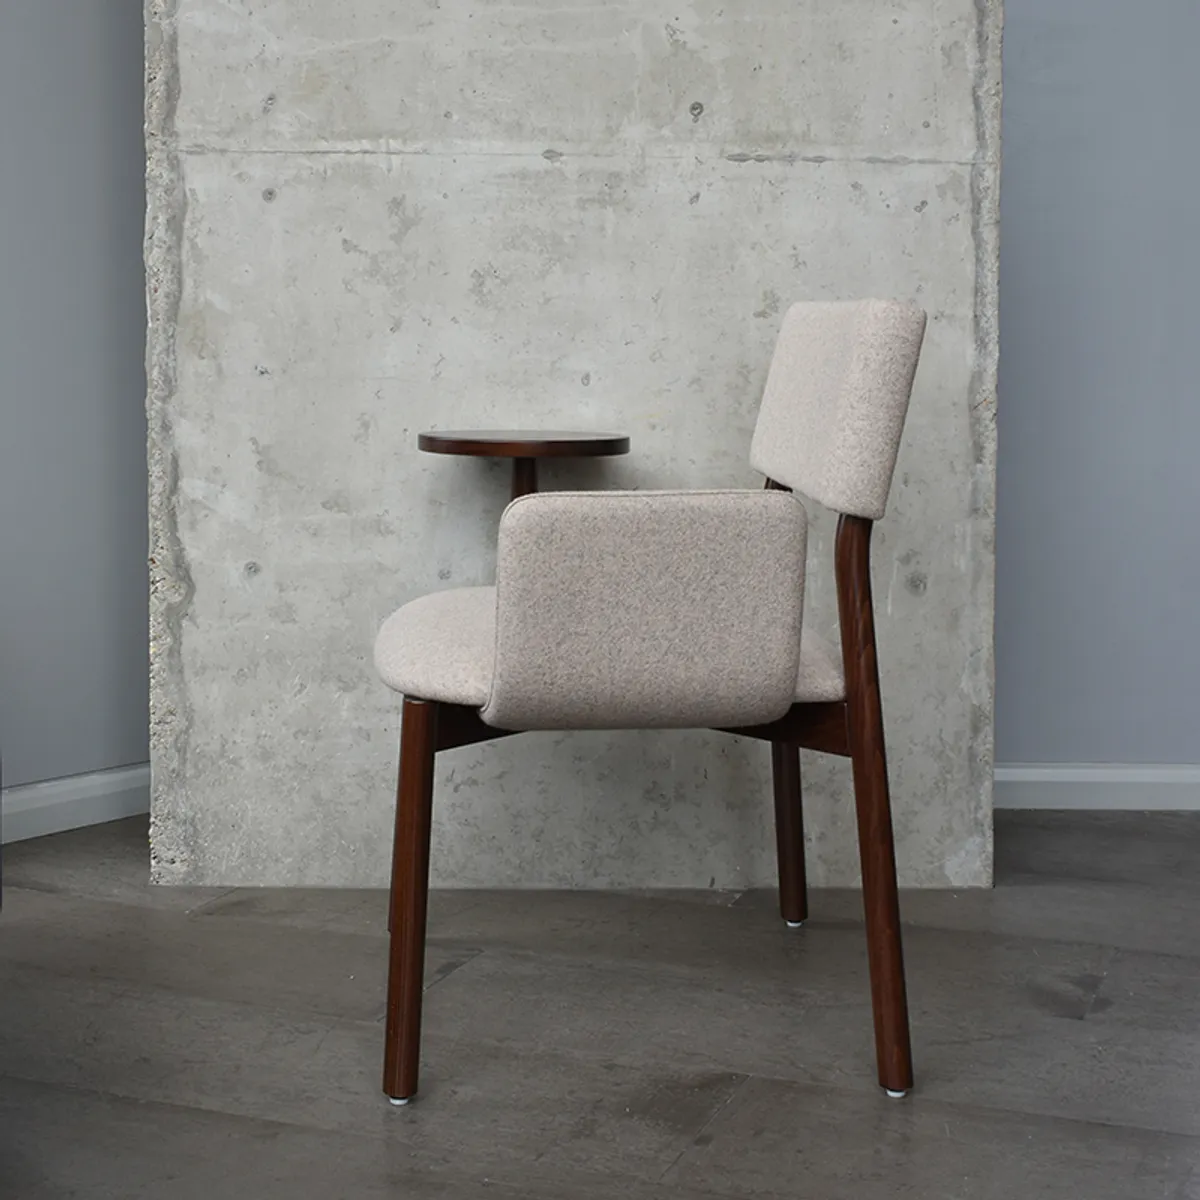 Scuelle Chair New Furniture From Milan 2019 By Inside Out Contracts 030